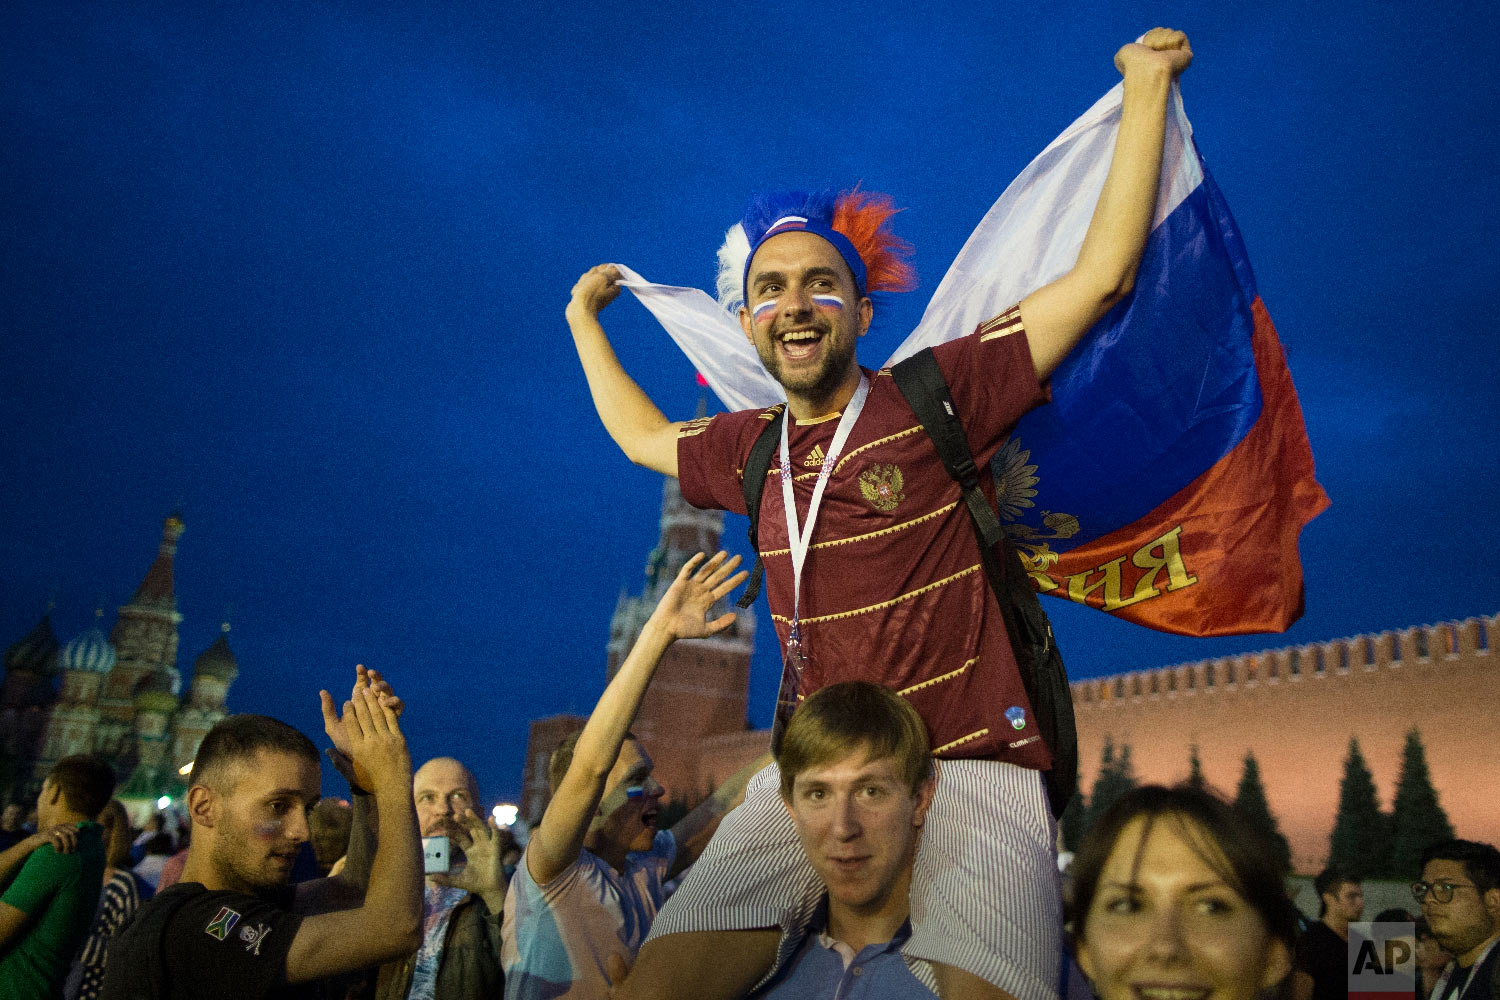  Russia soccer fans celebrate their team victory against Spain in Red Square after the round of 16 match between Spain and Russia at the 2018 soccer World Cup at the Luzhniki Stadium in Moscow, Russia, Sunday, July 1, 2018. Russia shocks Spain at the